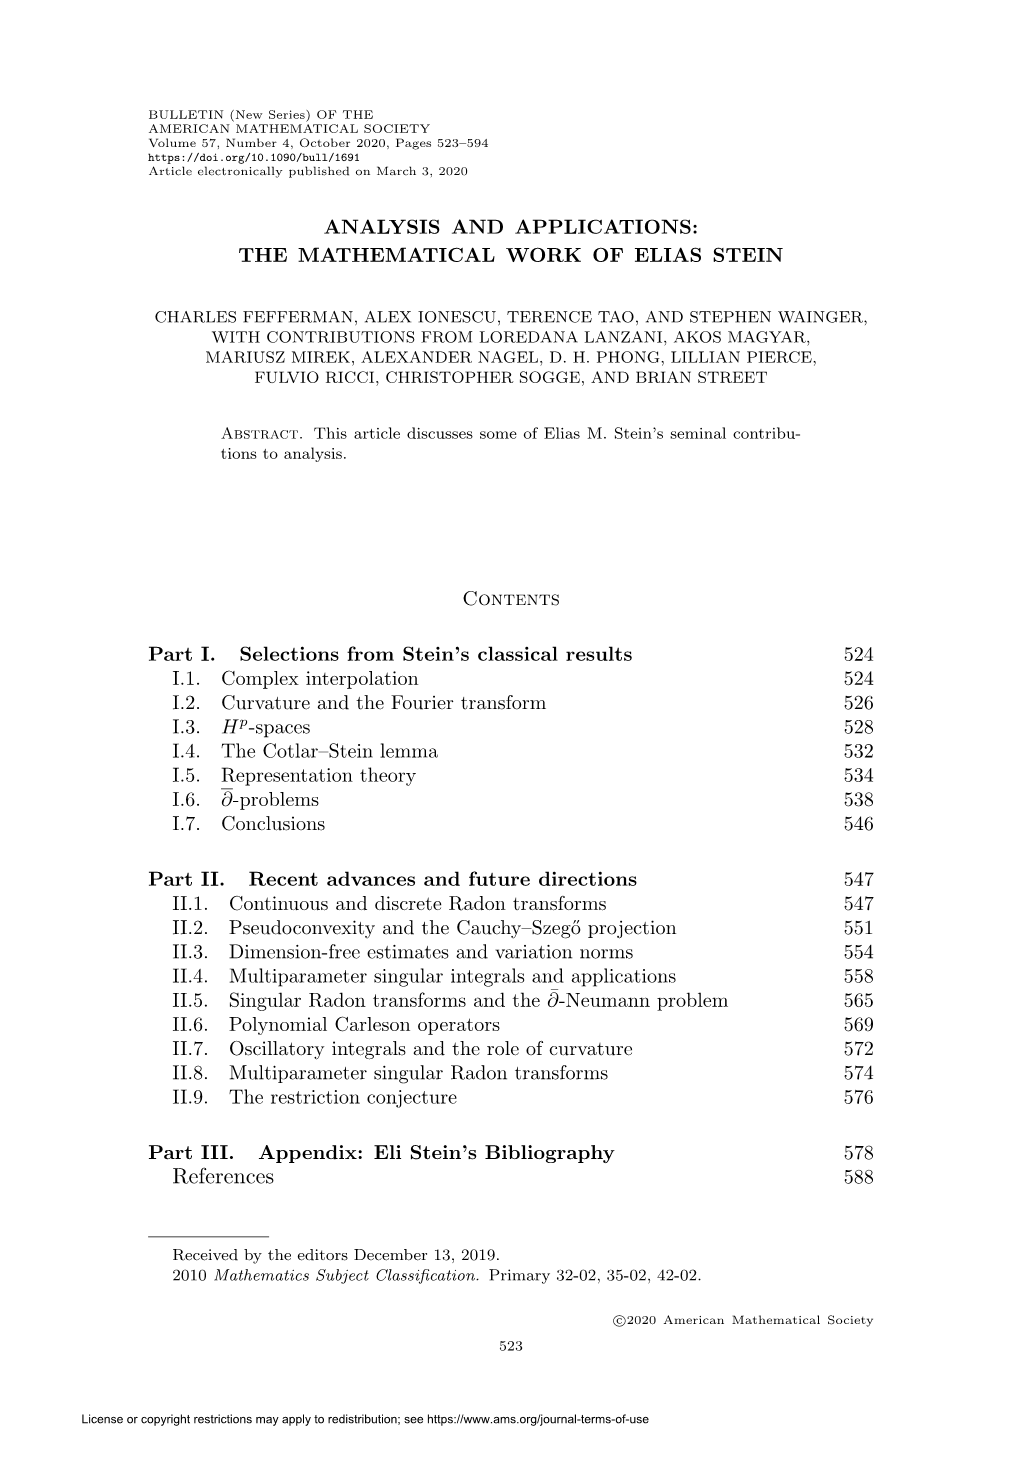 Analysis and Applications: the Mathematical Work of Elias Stein